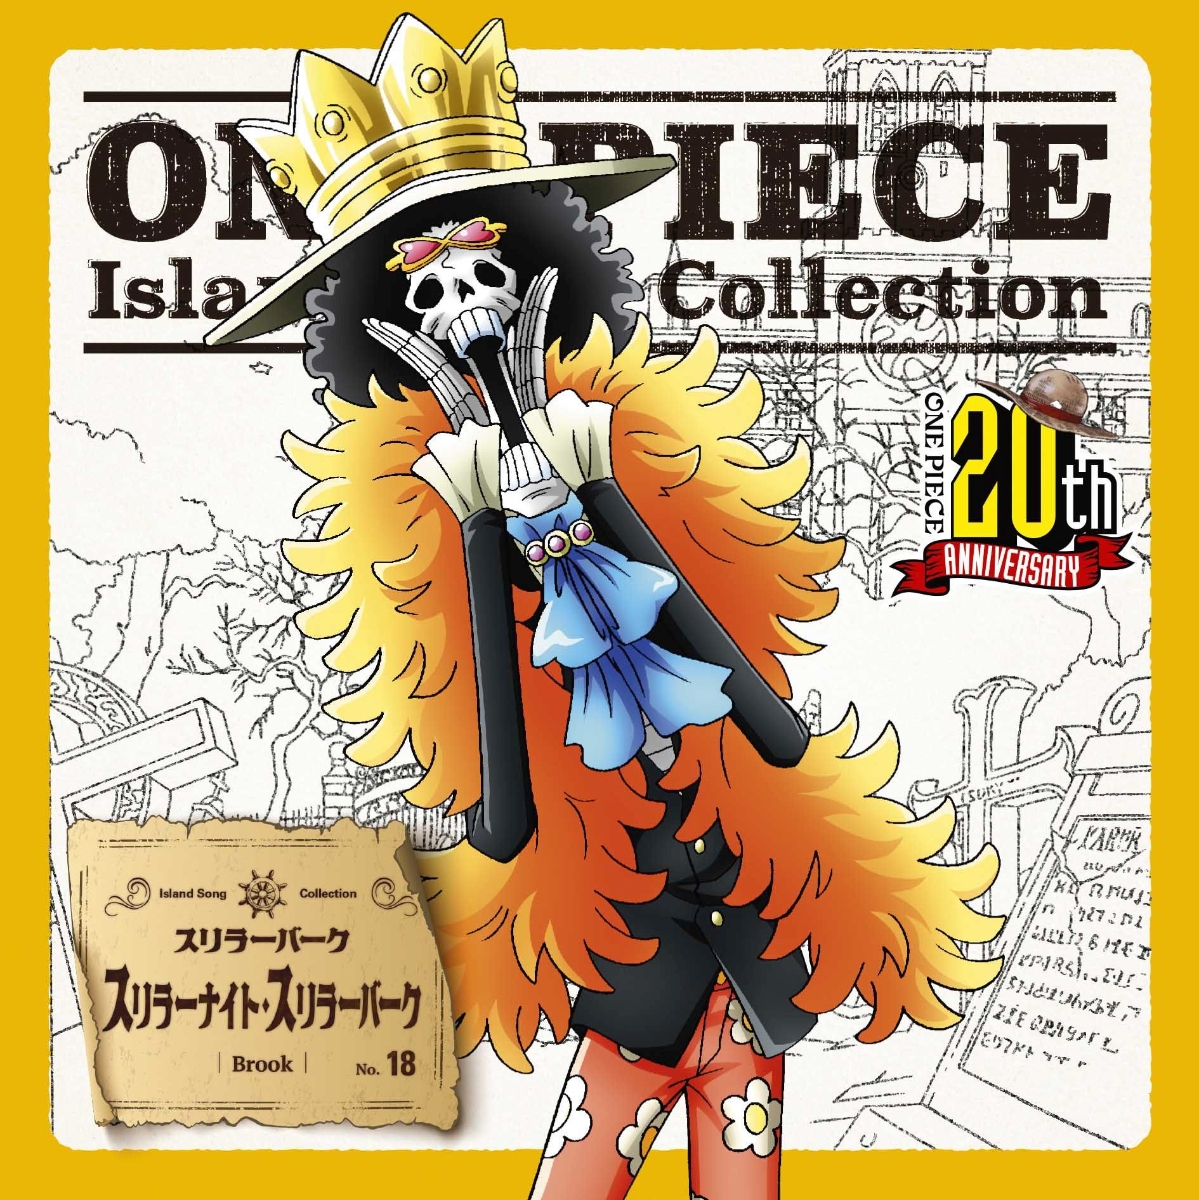 ONE PIECE　Island Song Collection スリラーバーク「スリラーナイト・スリラーバーク」画像